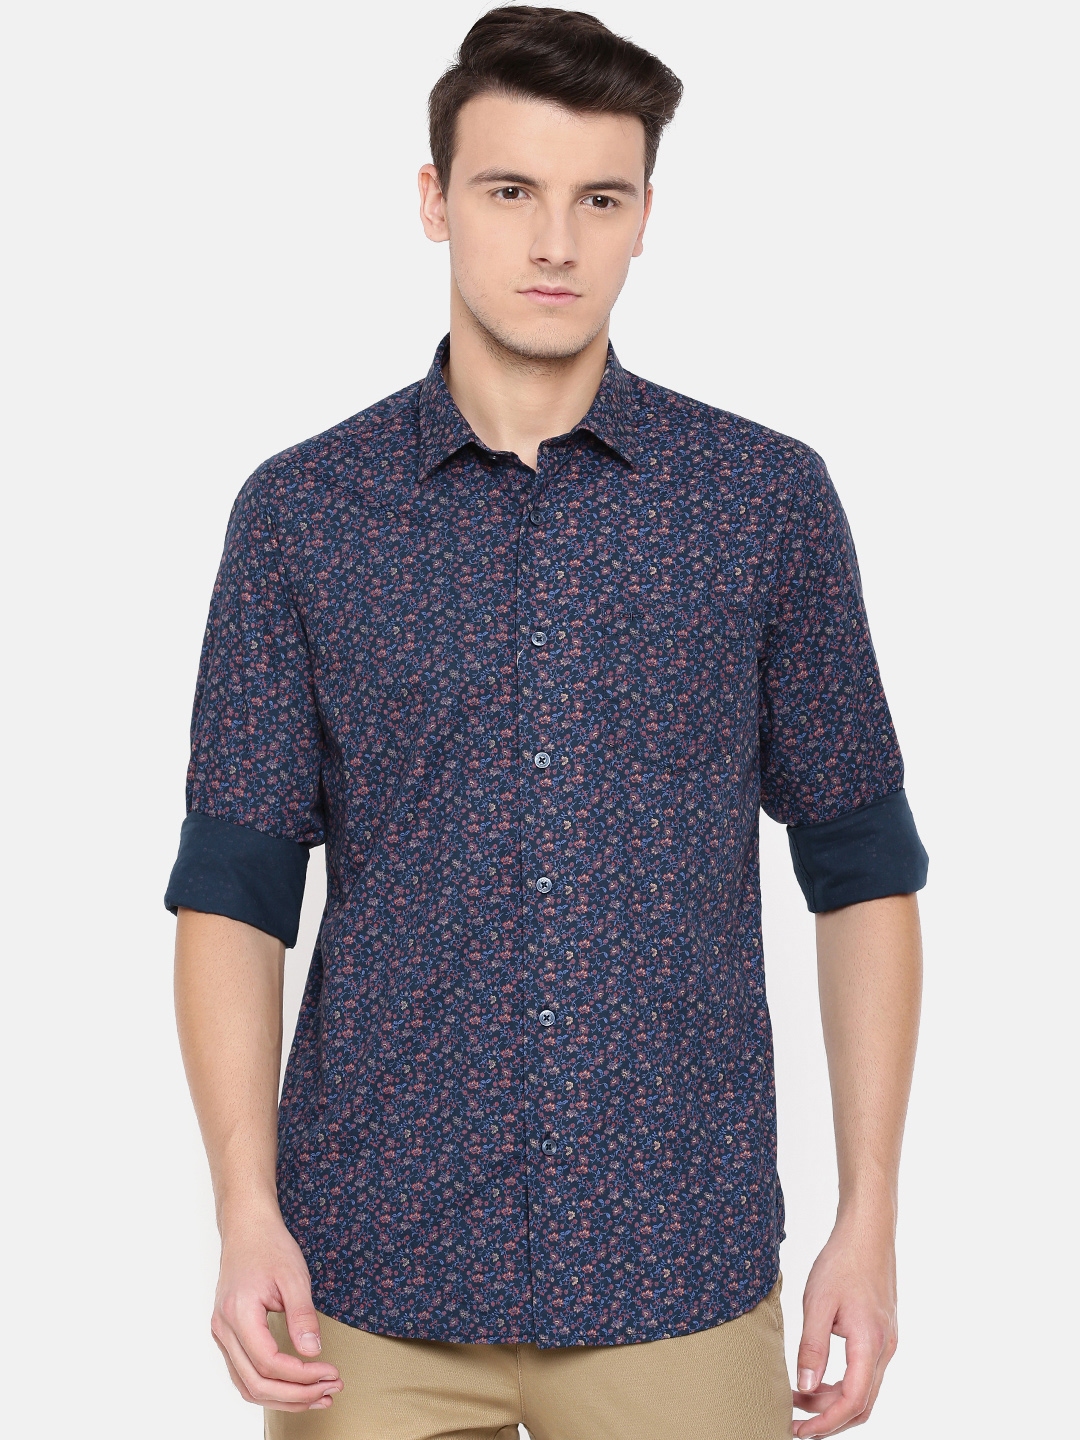 Buy ColorPlus Men Navy Blue & Red Contemporary Fit Printed Casual Shirt ...